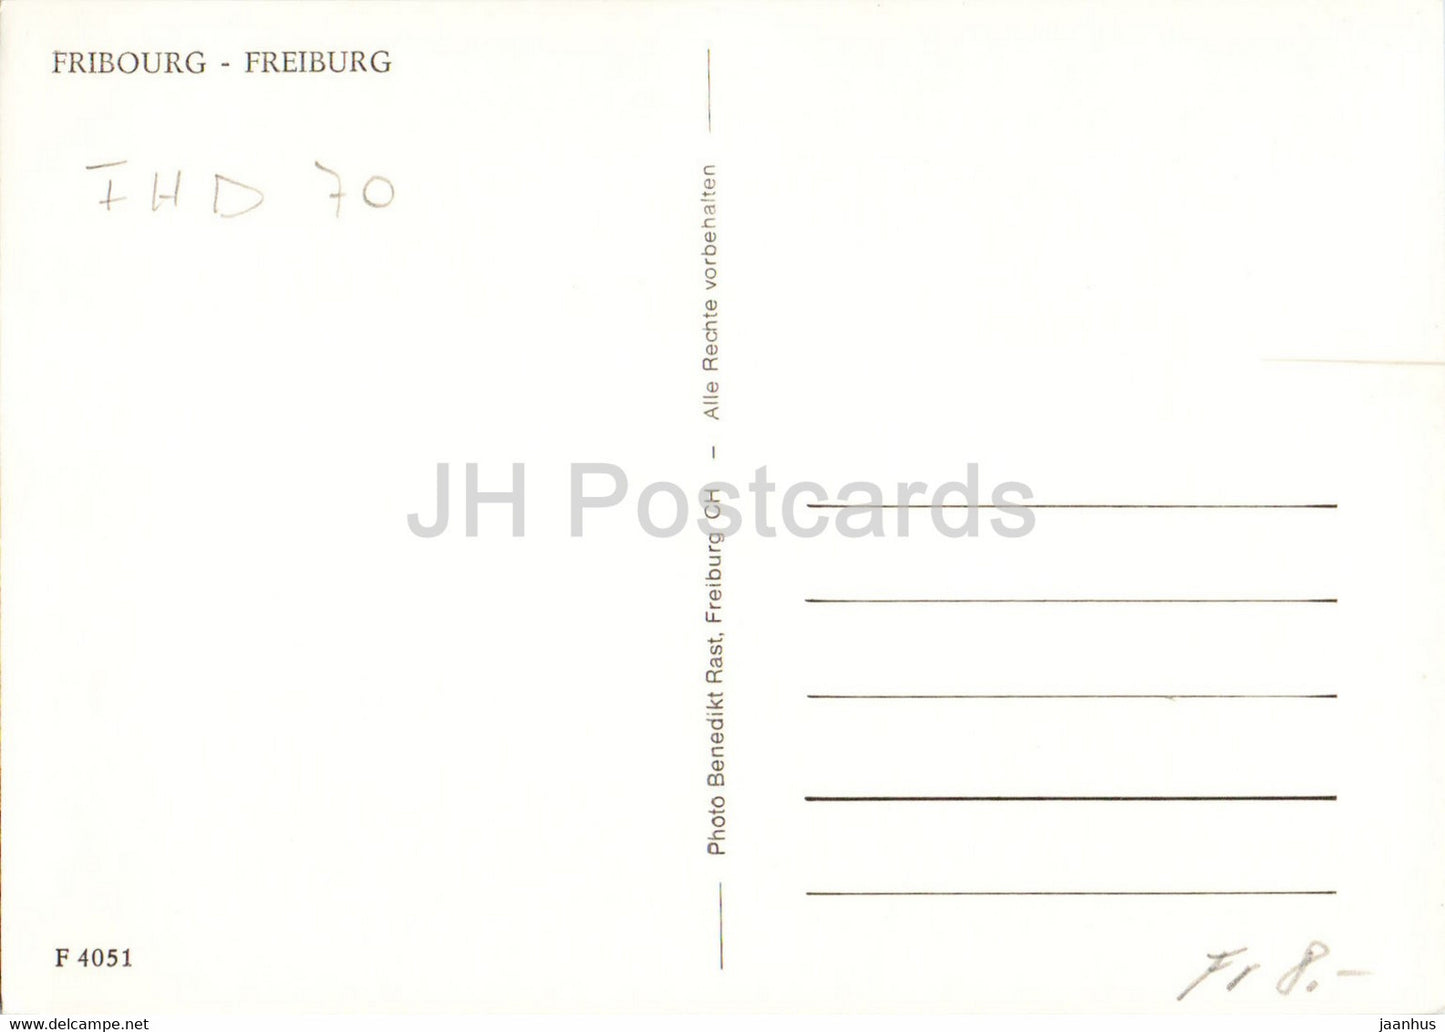 Fribourg - Fribourg - 4051 - carte postale ancienne - Suisse - occasion